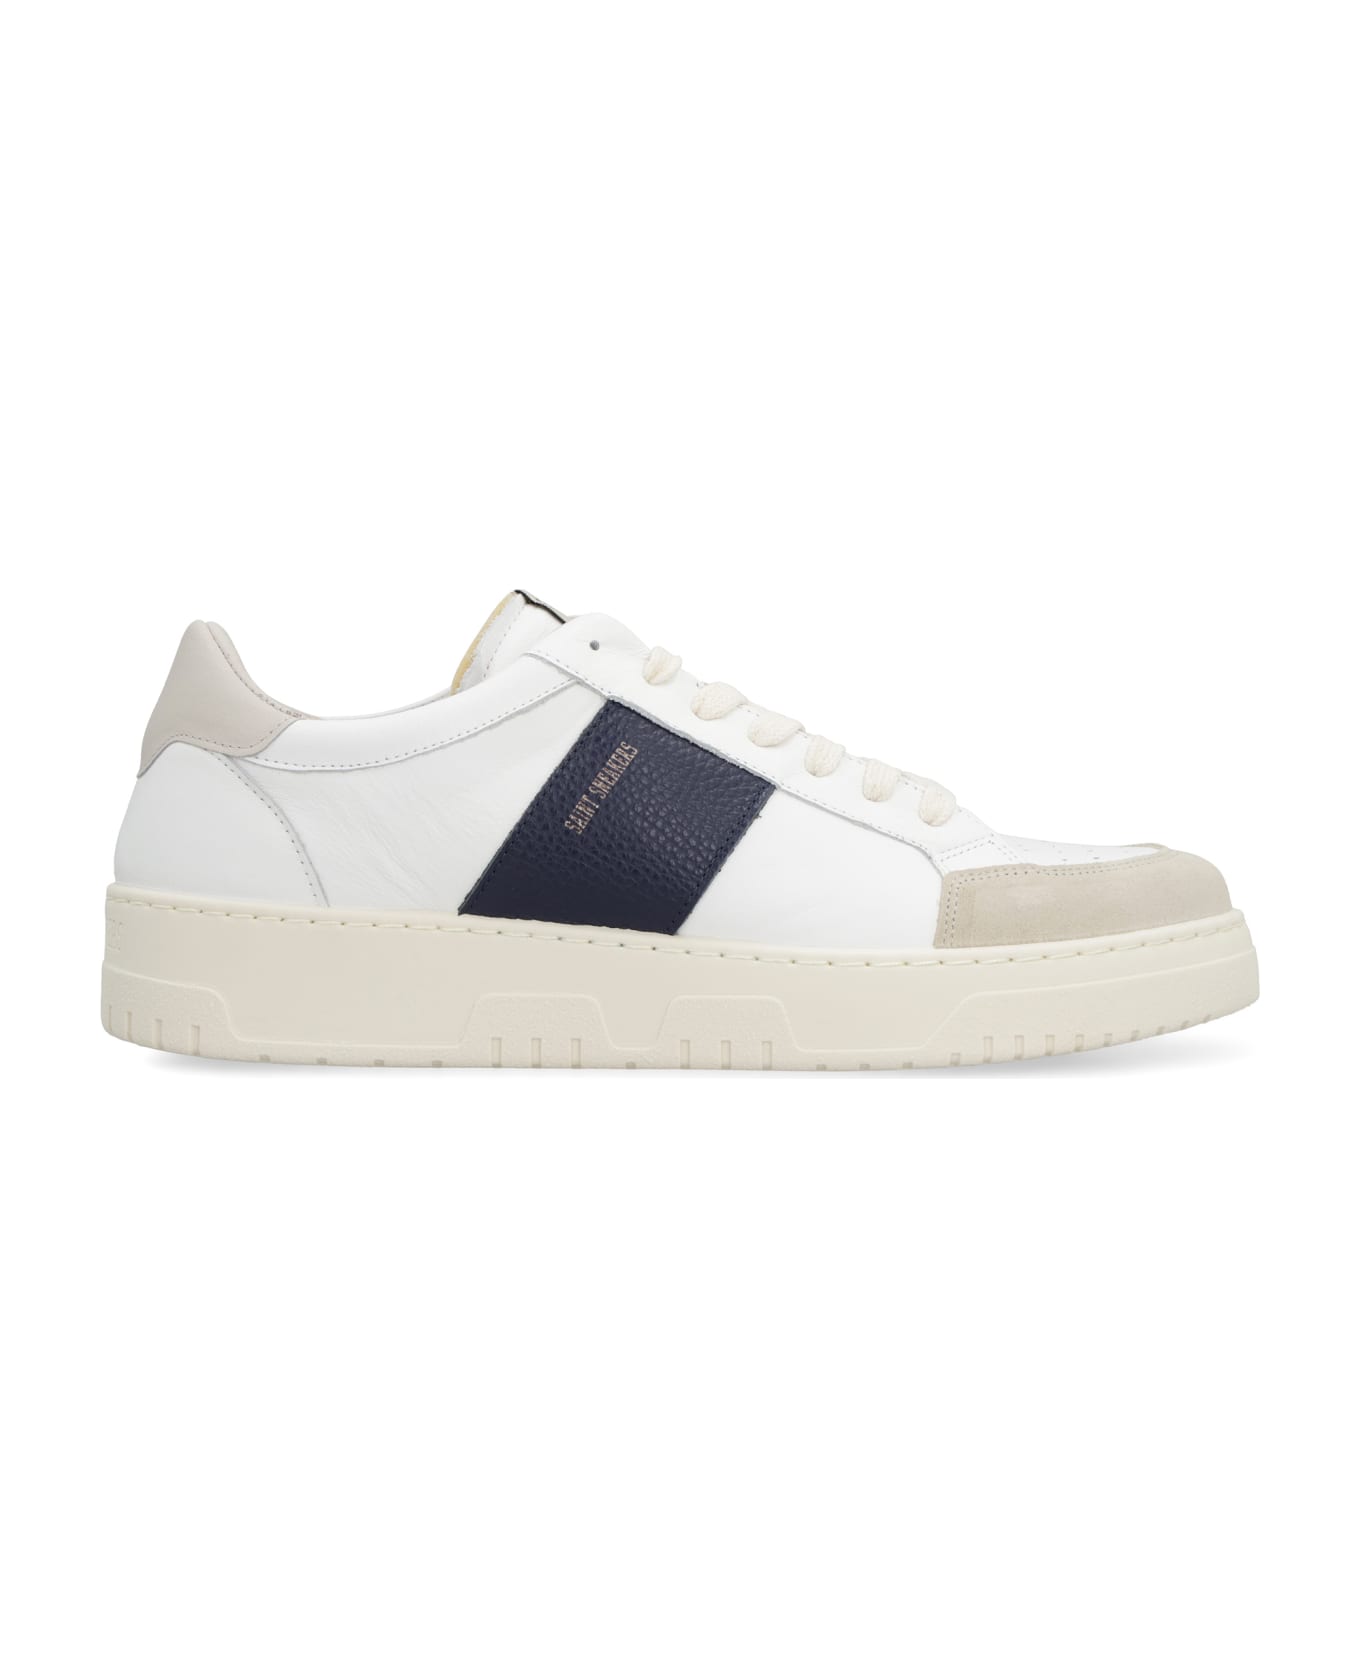 Saint Sneakers Sail Leather Low-top Sneakers - White スニーカー